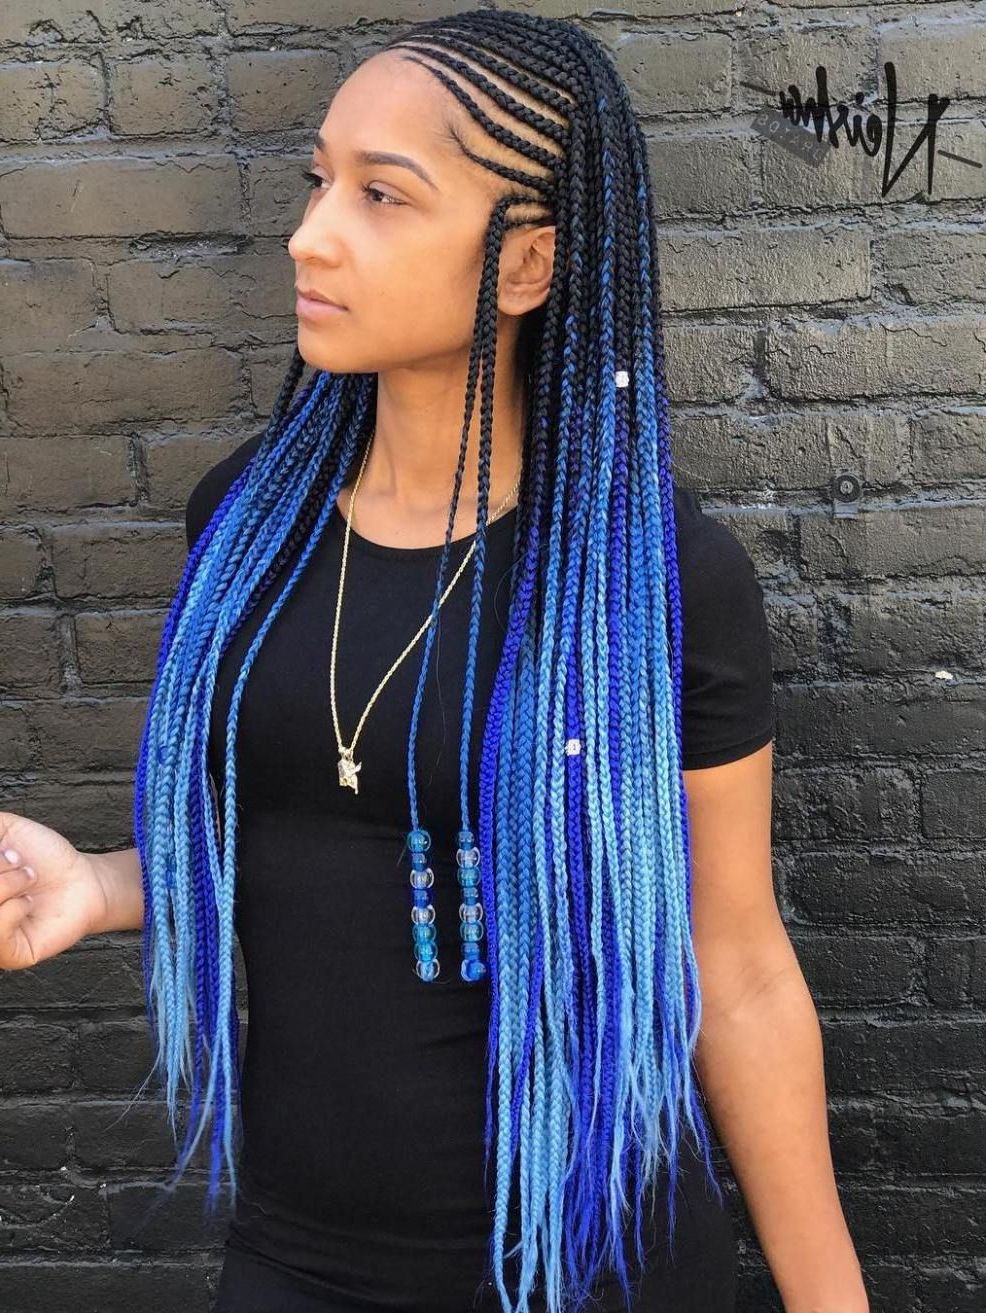 2019 Blue And Black Cornrows Braid Hairstyles Inside 20 Amazing Fulani Braids For Women Of All Ages (View 1 of 20)